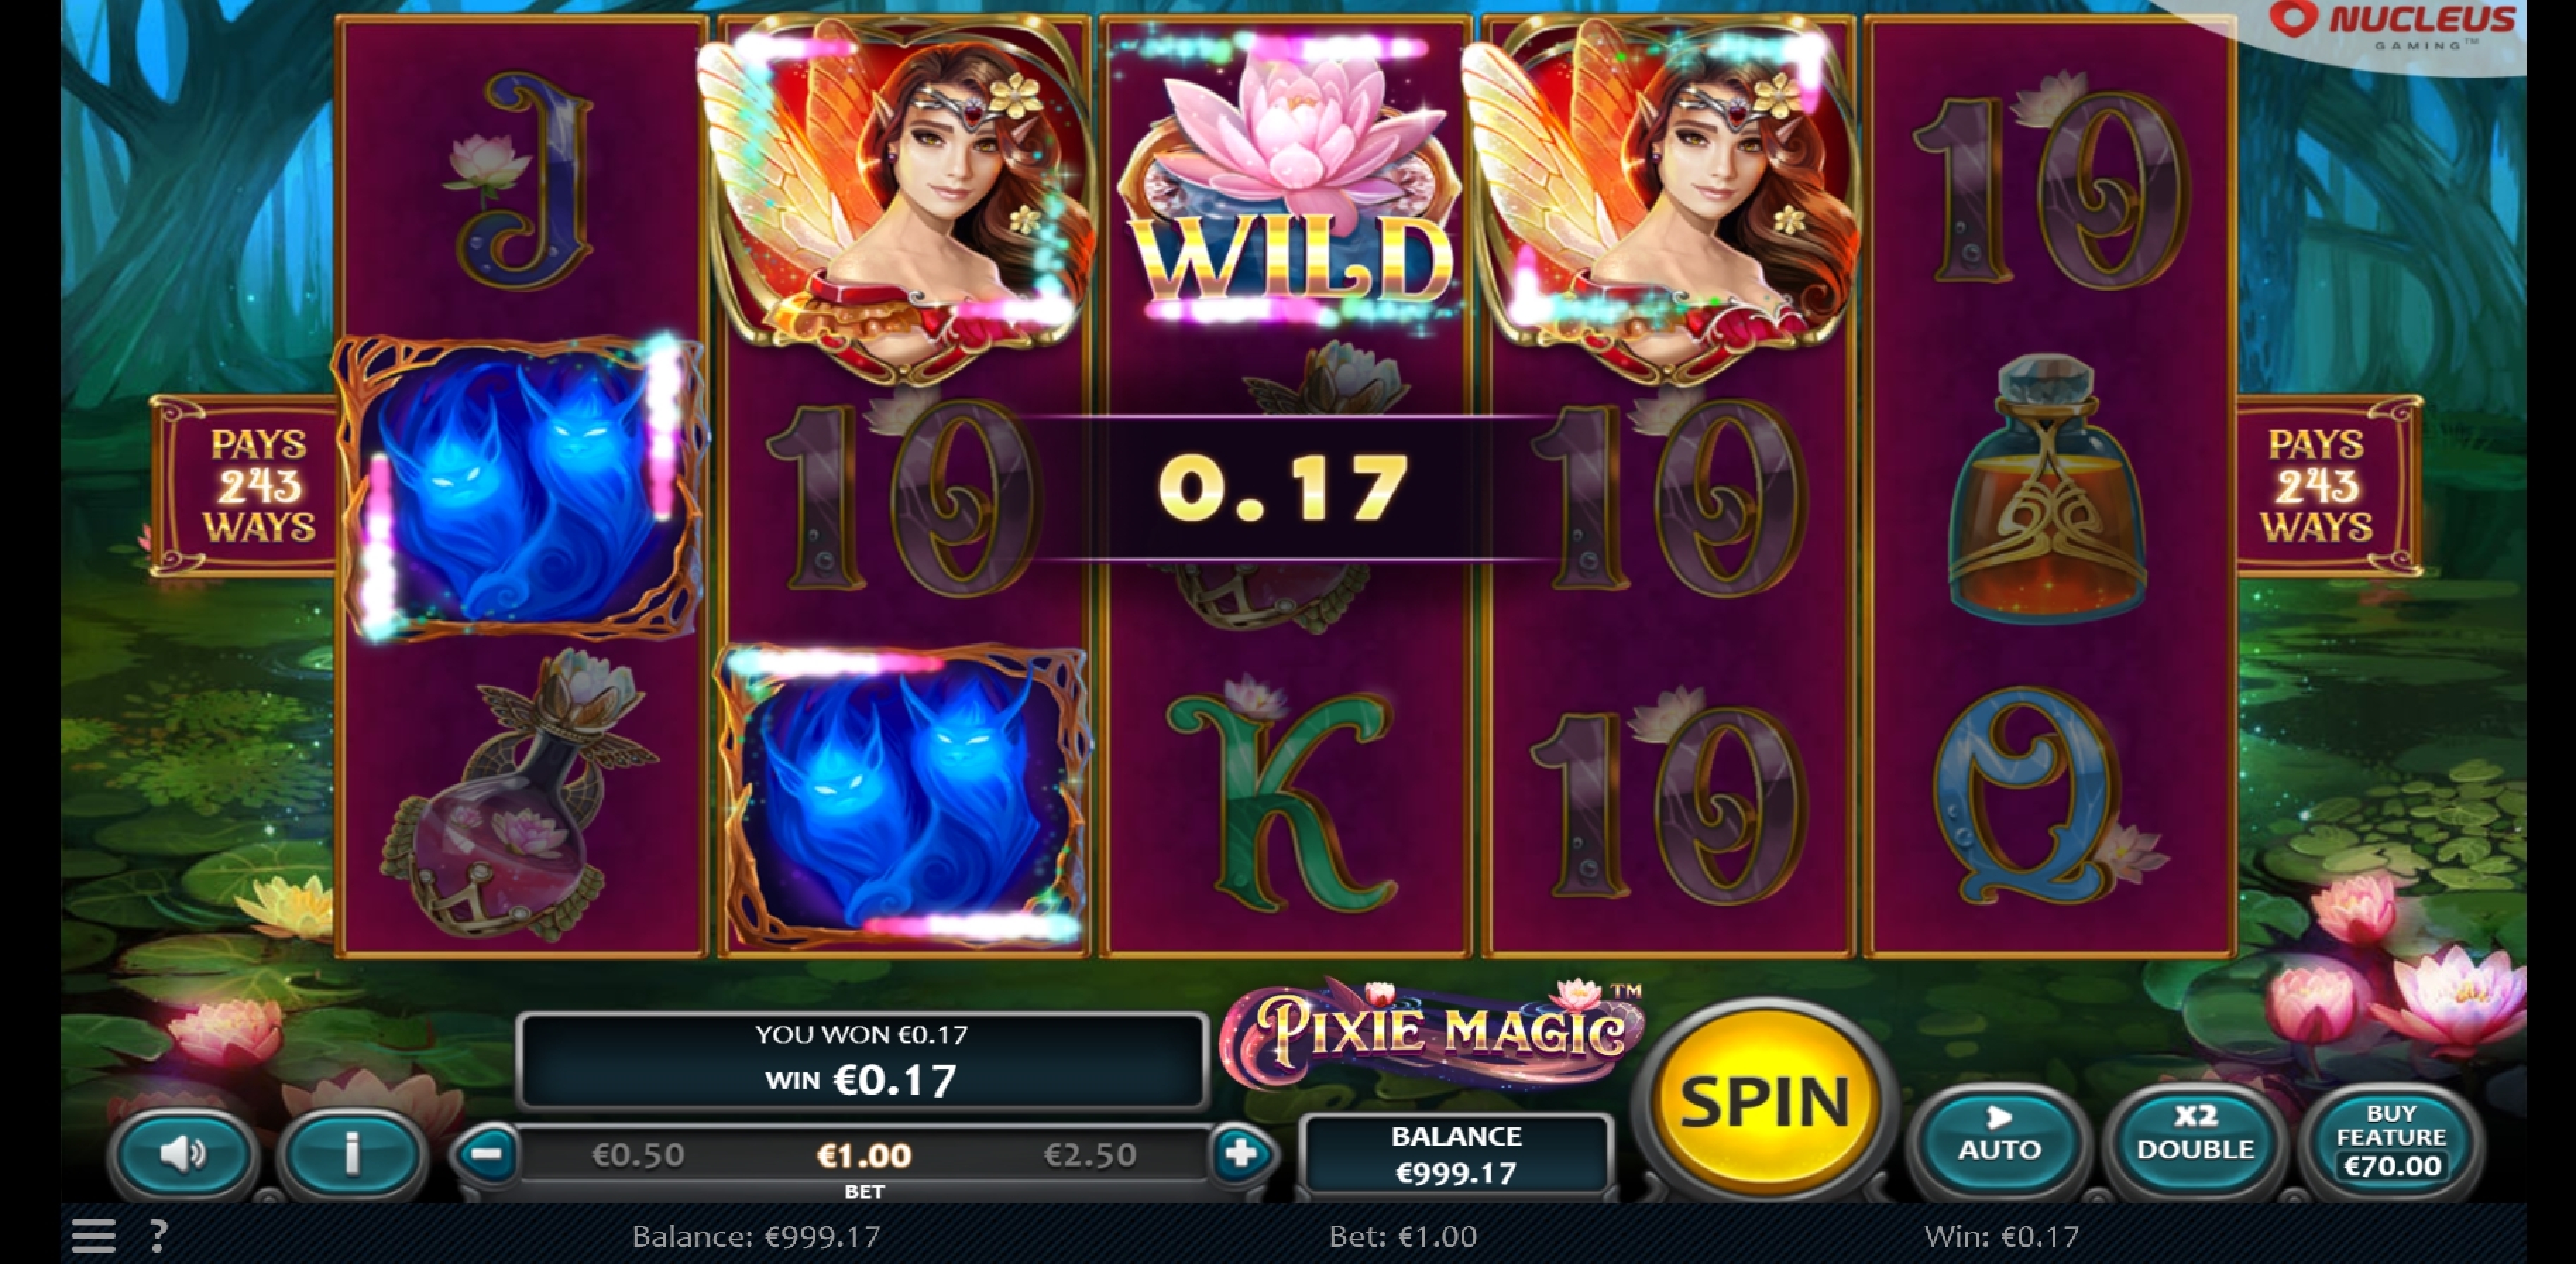 Win Money in Pixie Magic Free Slot Game by Nucleus Gaming